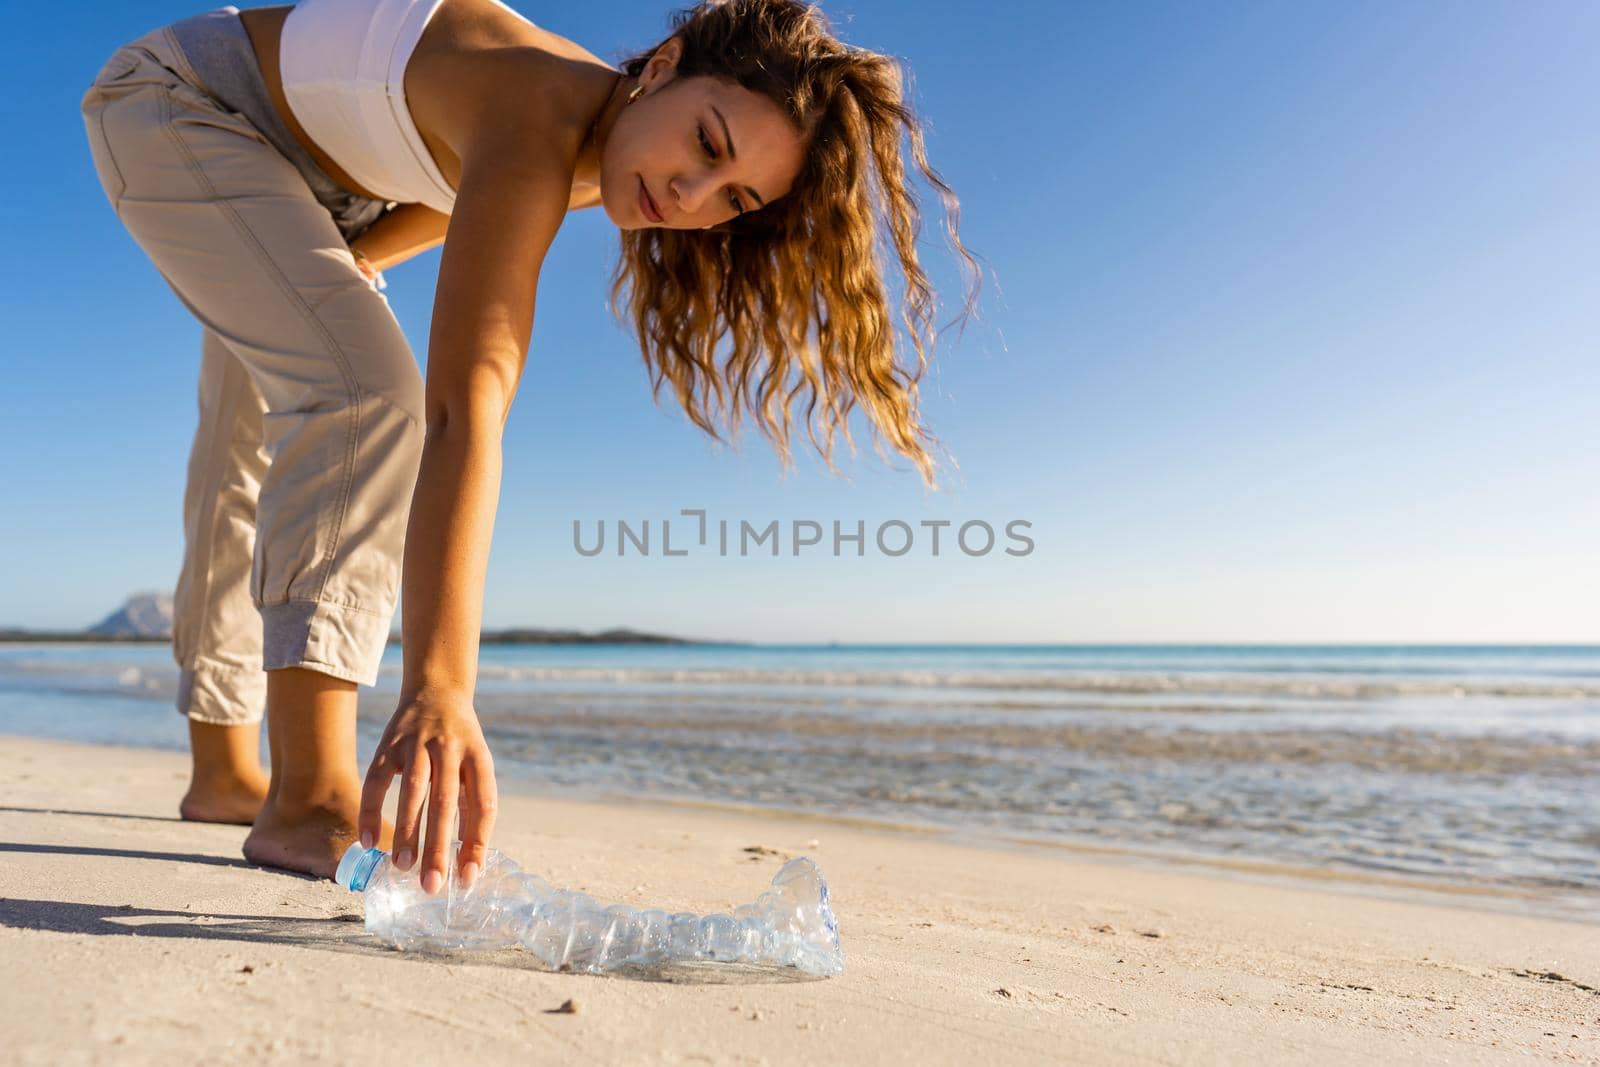 Young woman well educated and sensitive to environmental issues collects an empty plastic bottle abandoned on the seashore to preserve the ocean from plastic waste. Concept of taking care of nature